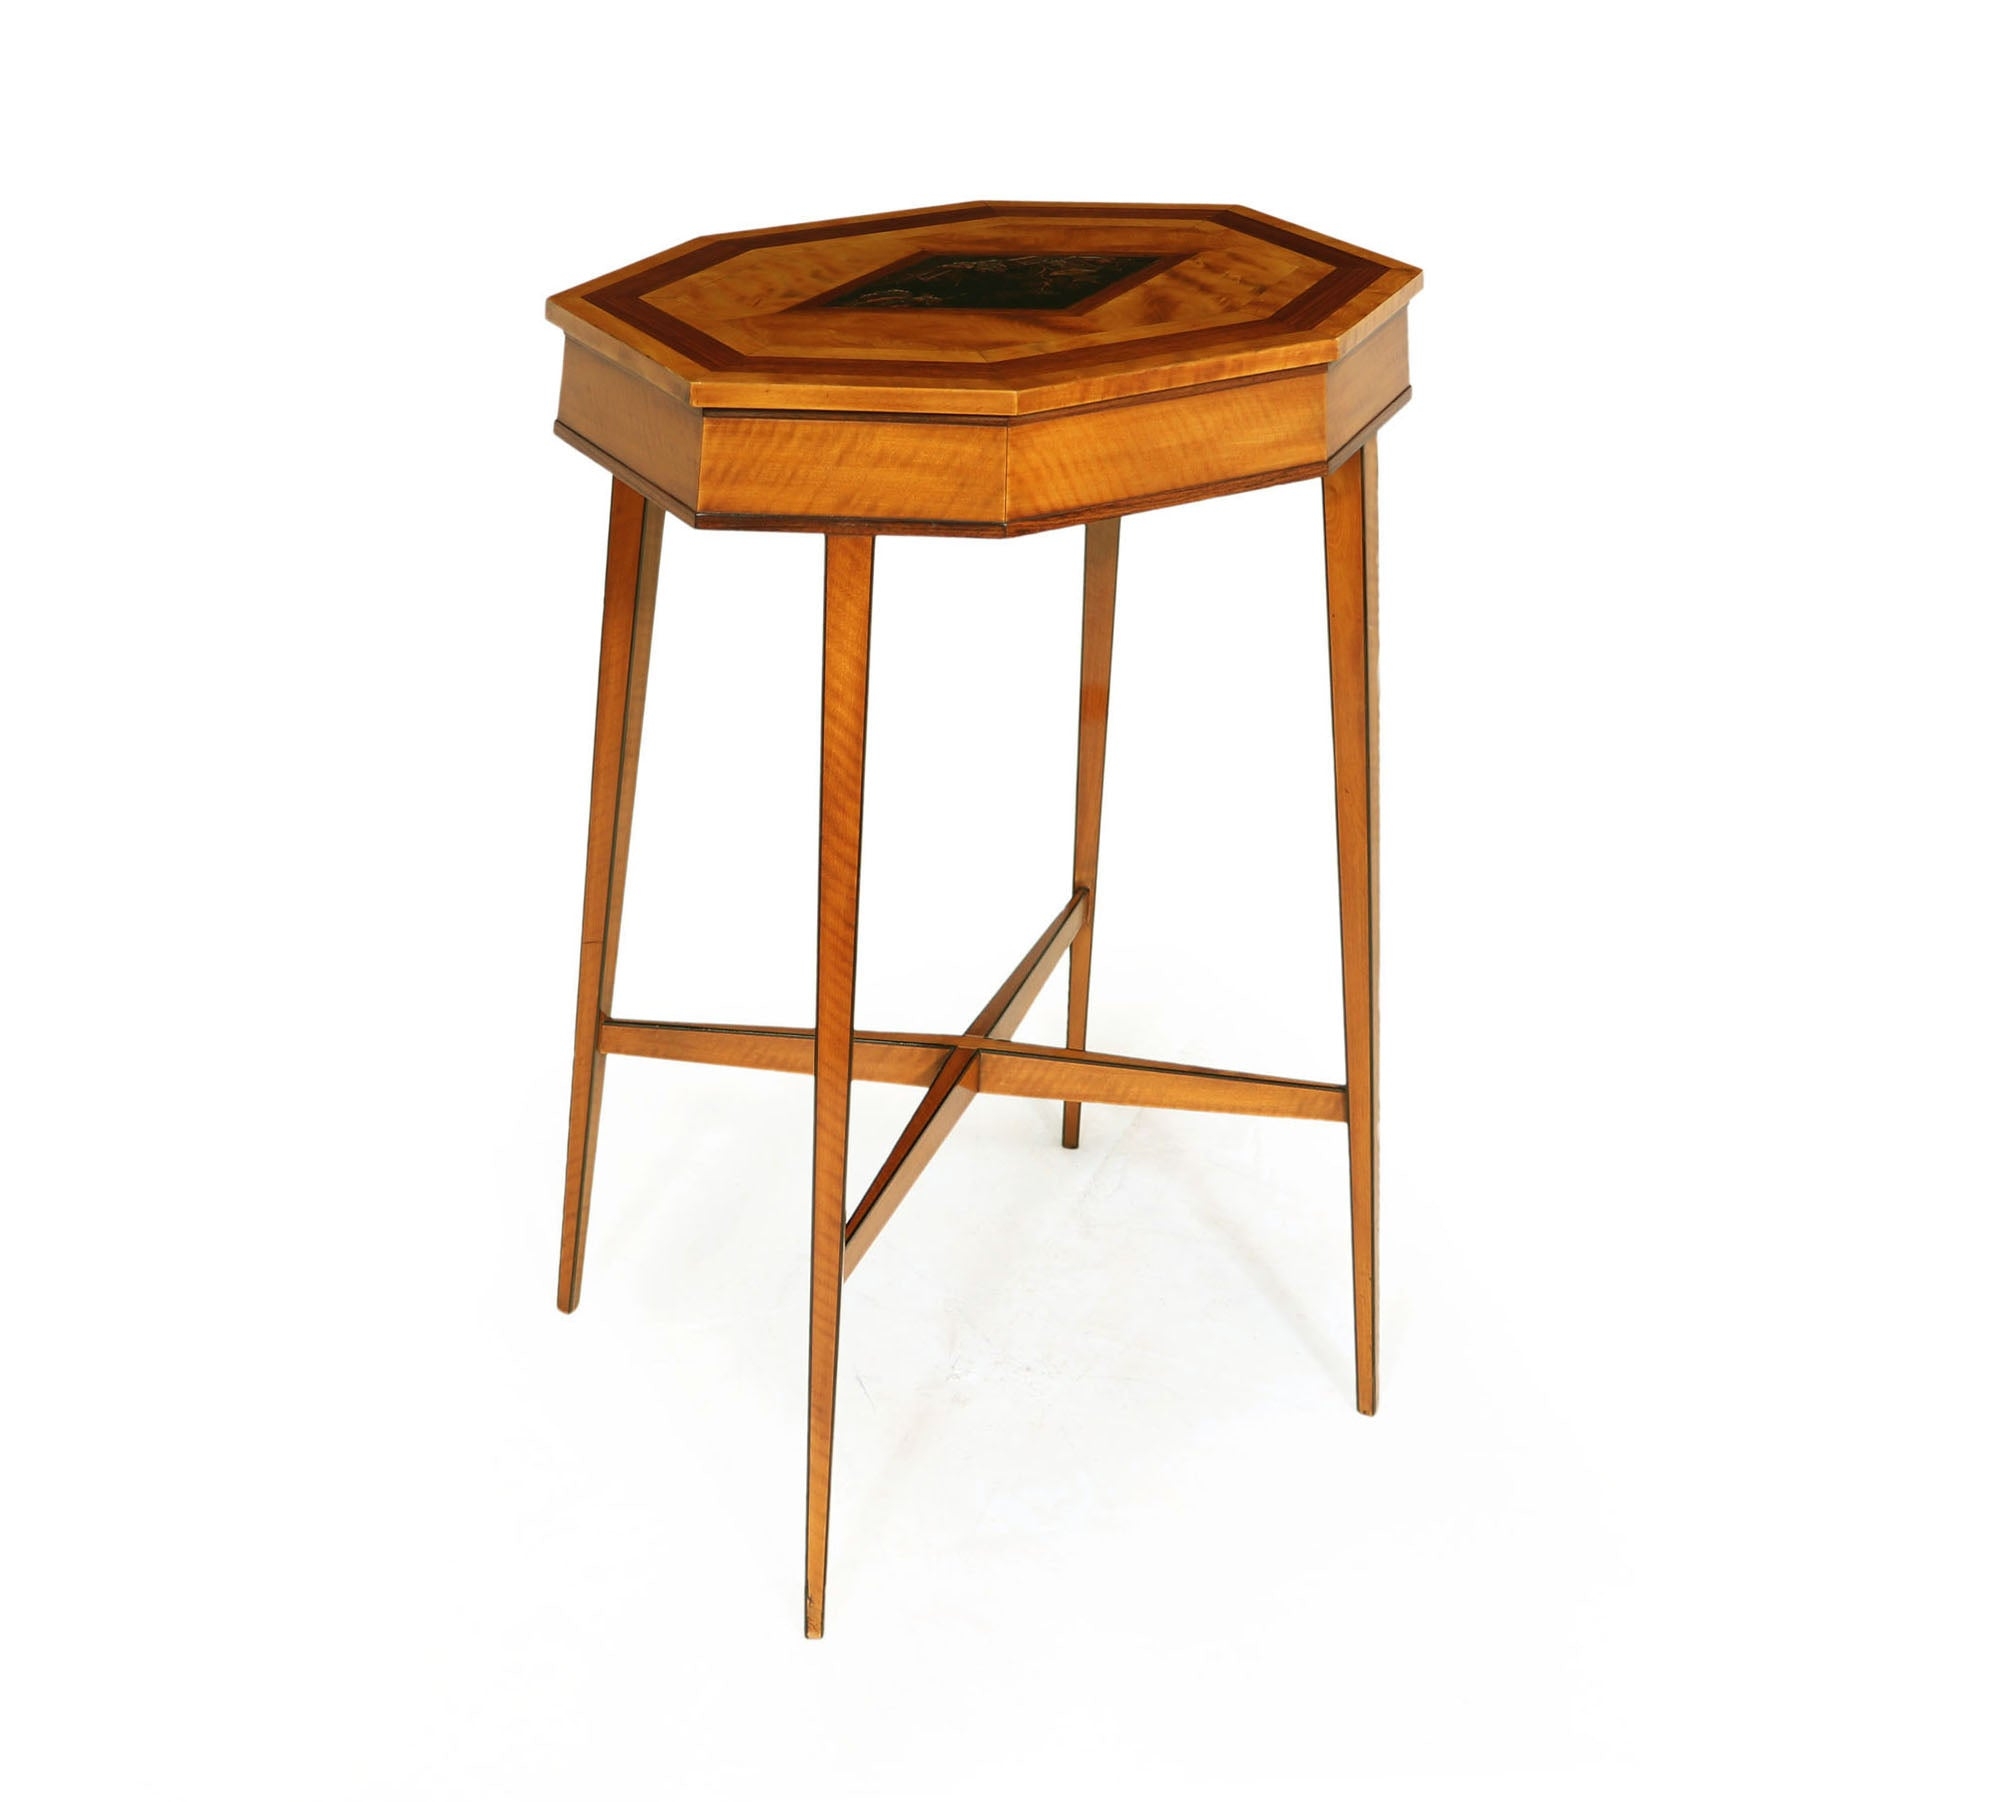 Antique Satinwood and Chinoiserie Side Table c1900 – The Furniture Rooms